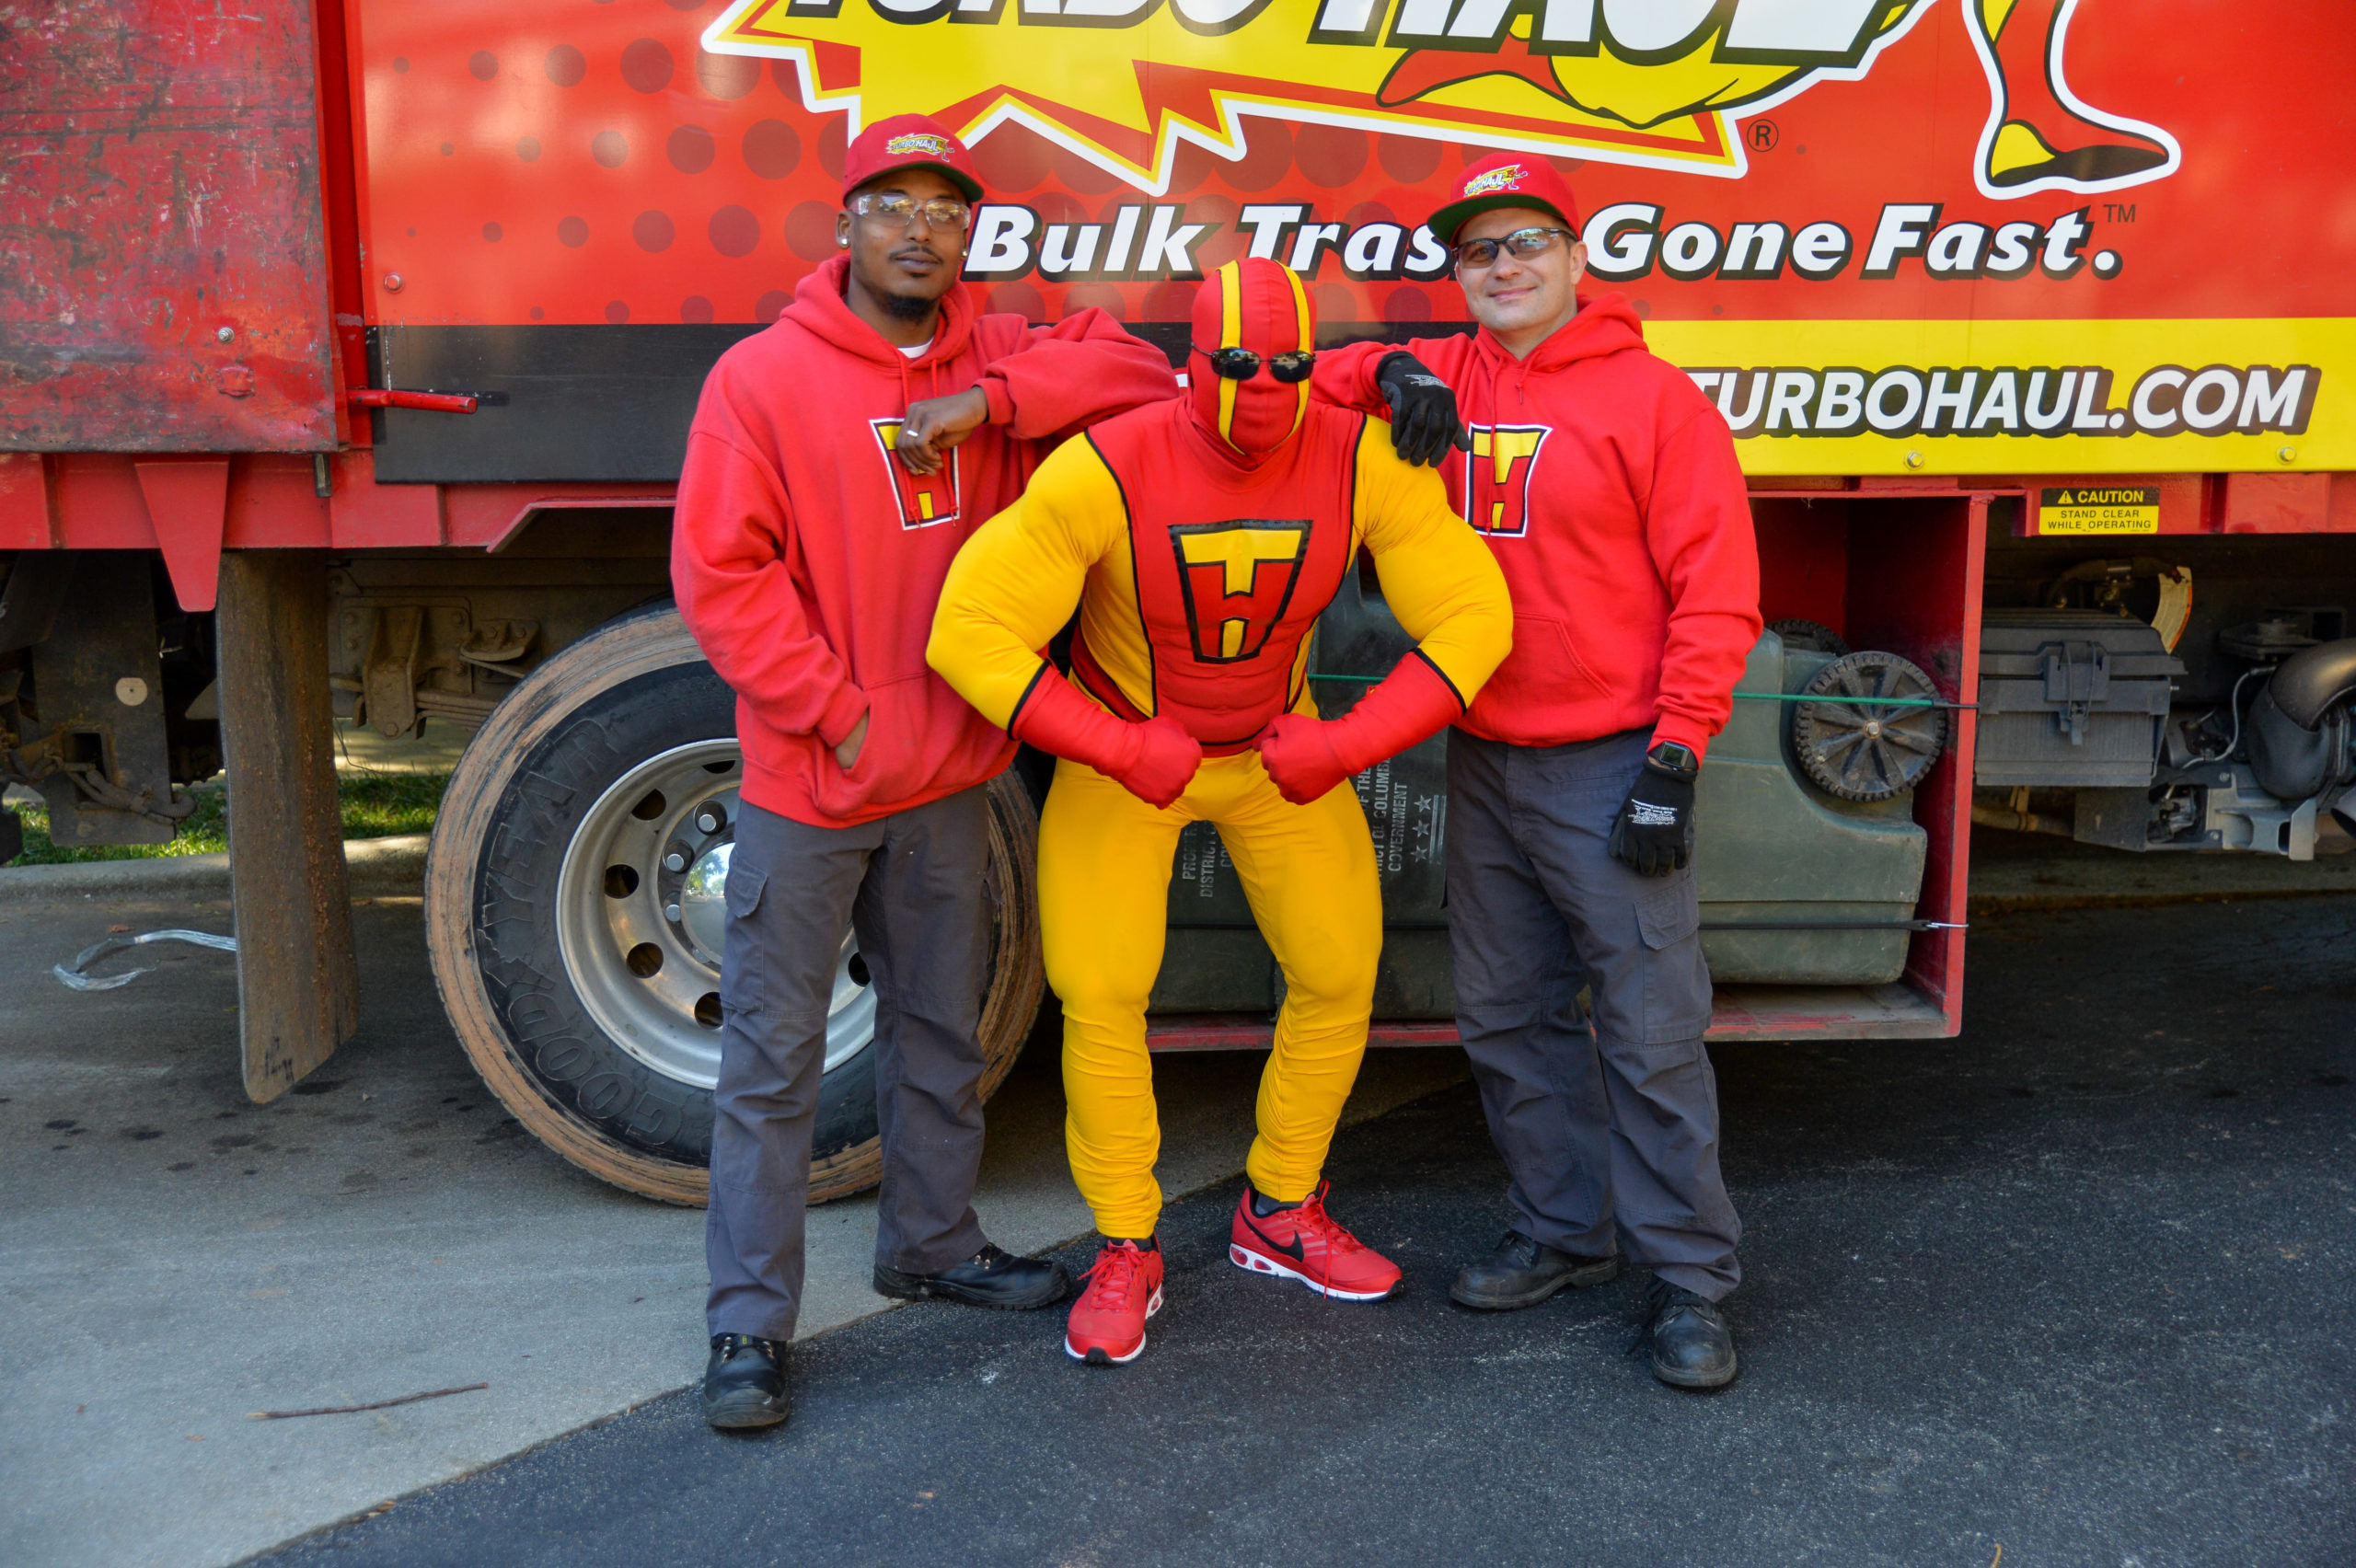 Employees posing with TurboHaul Man in Forestville, Maryland